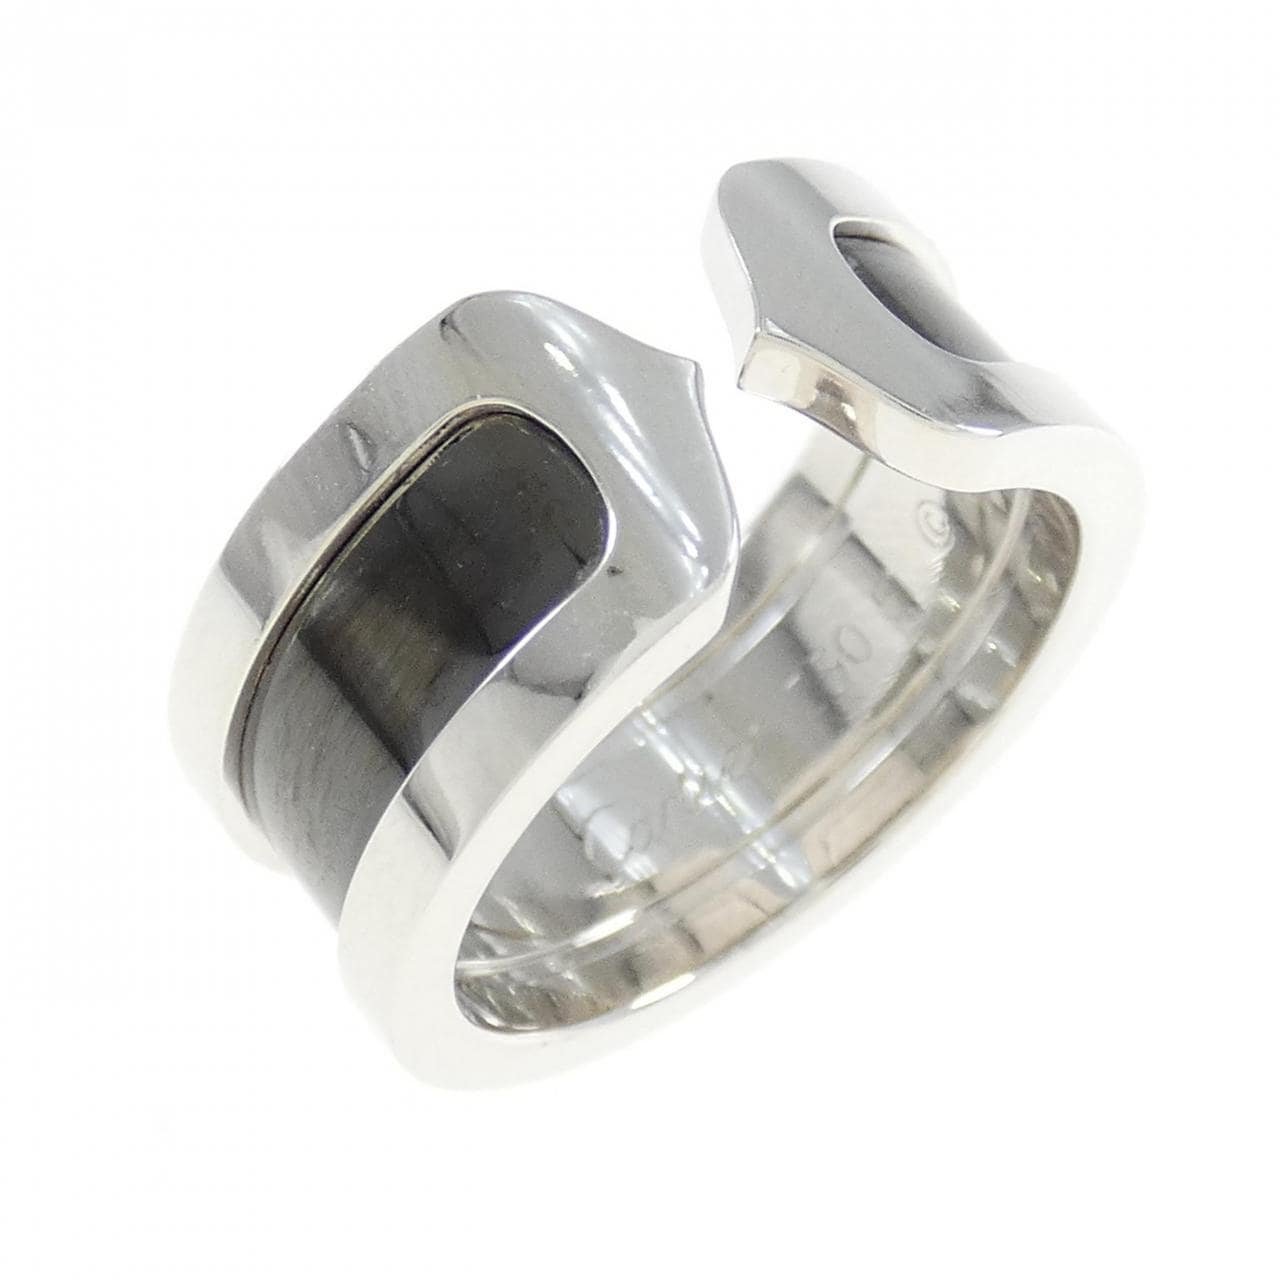 Cartier C2 limited ring